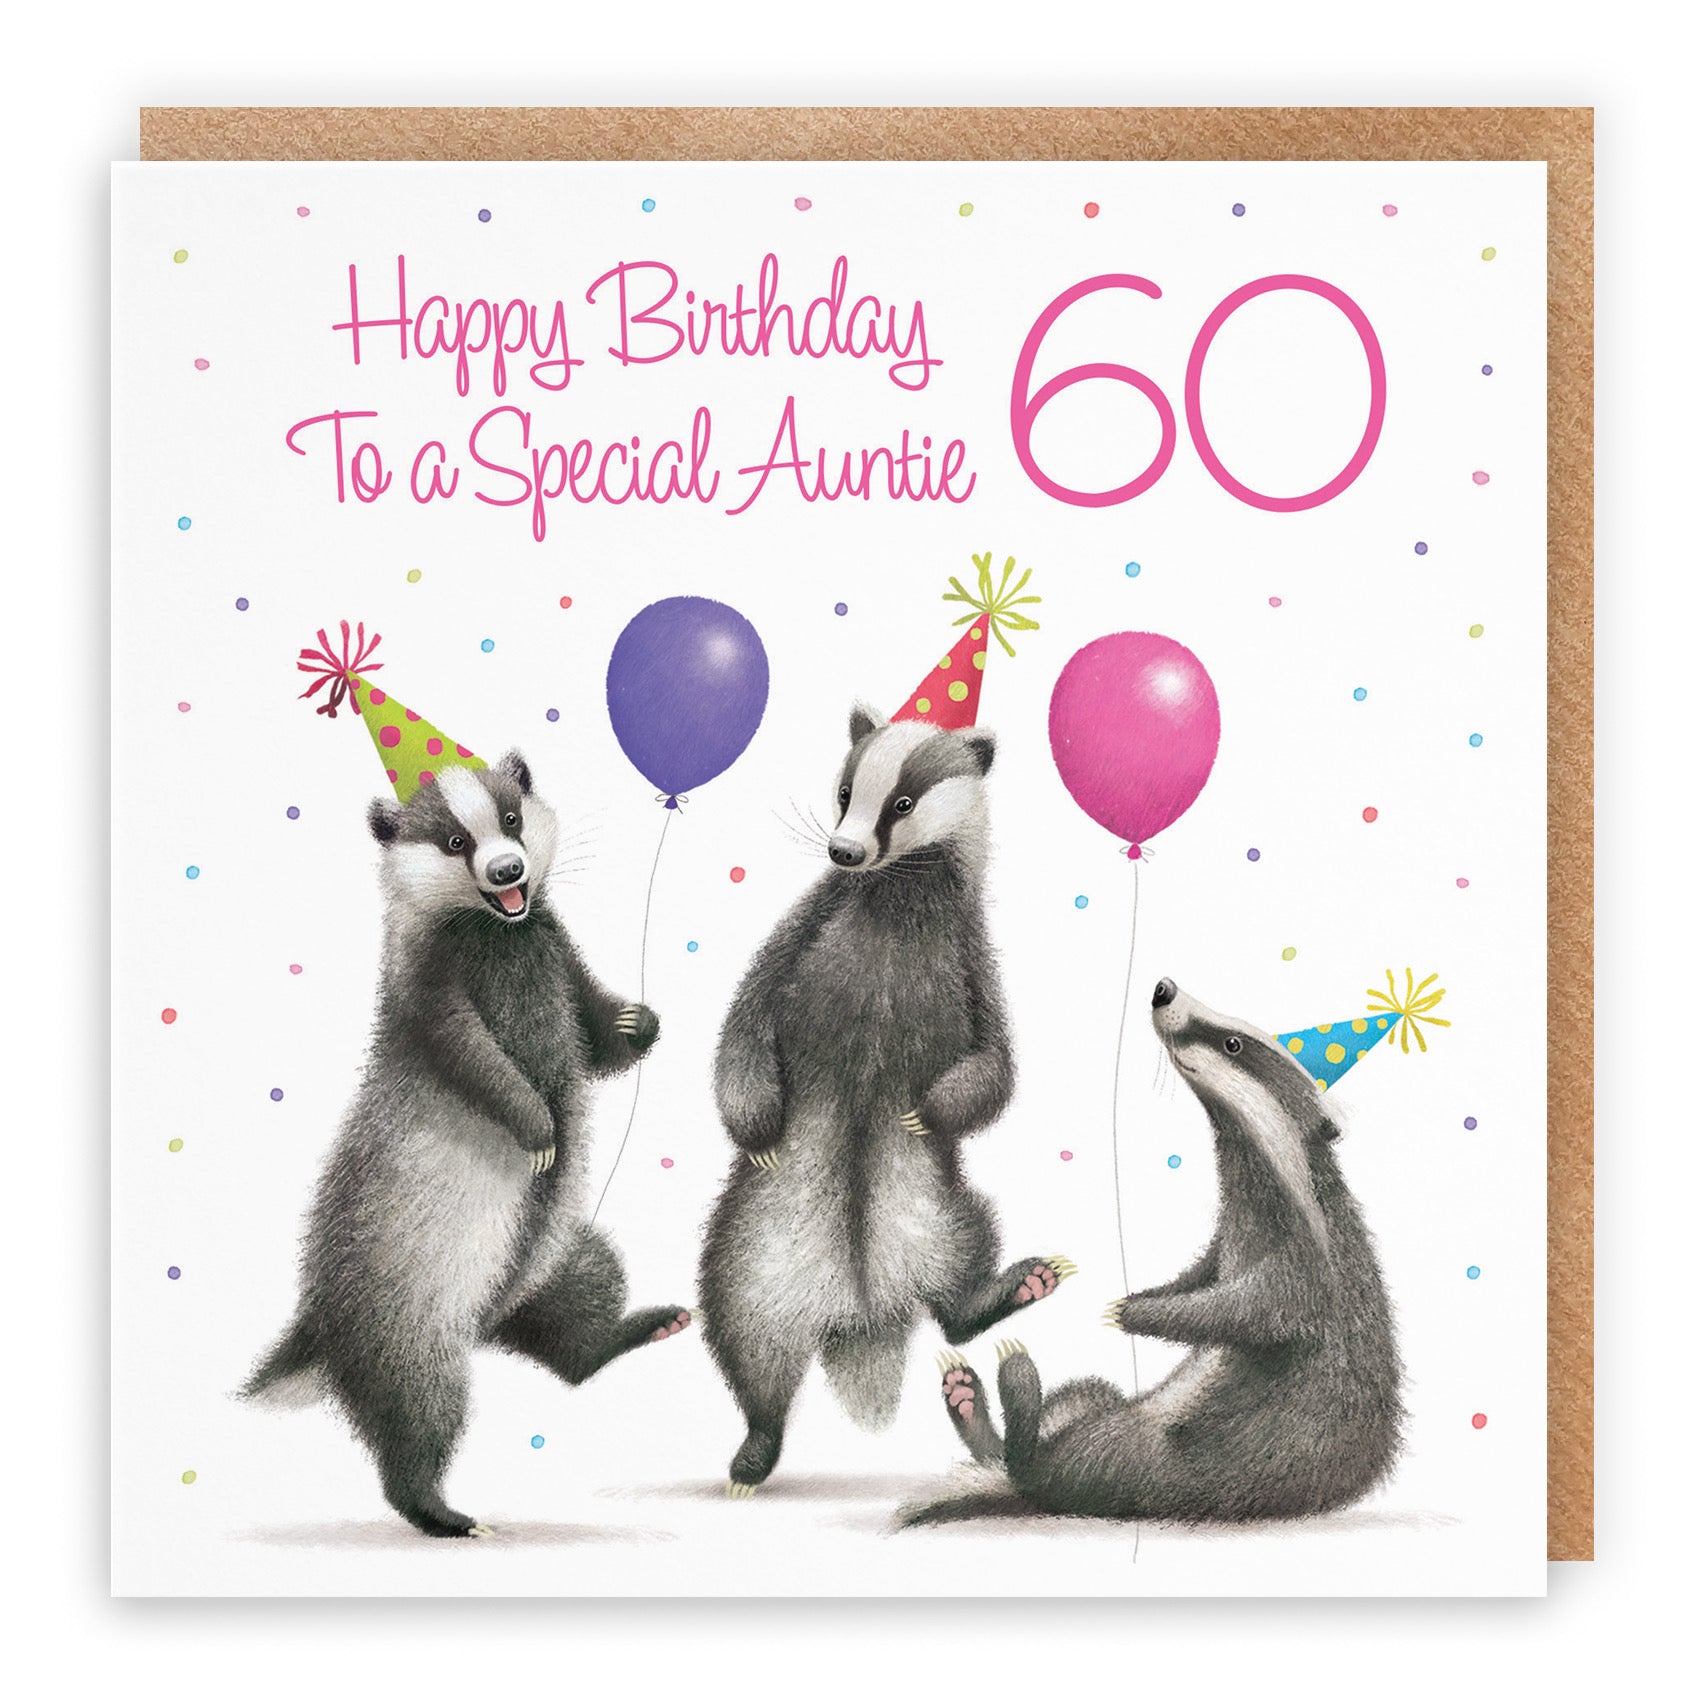 60th Auntie Badgers Birthday Card Milo's Gallery - Default Title (B0CRXV9V2M)